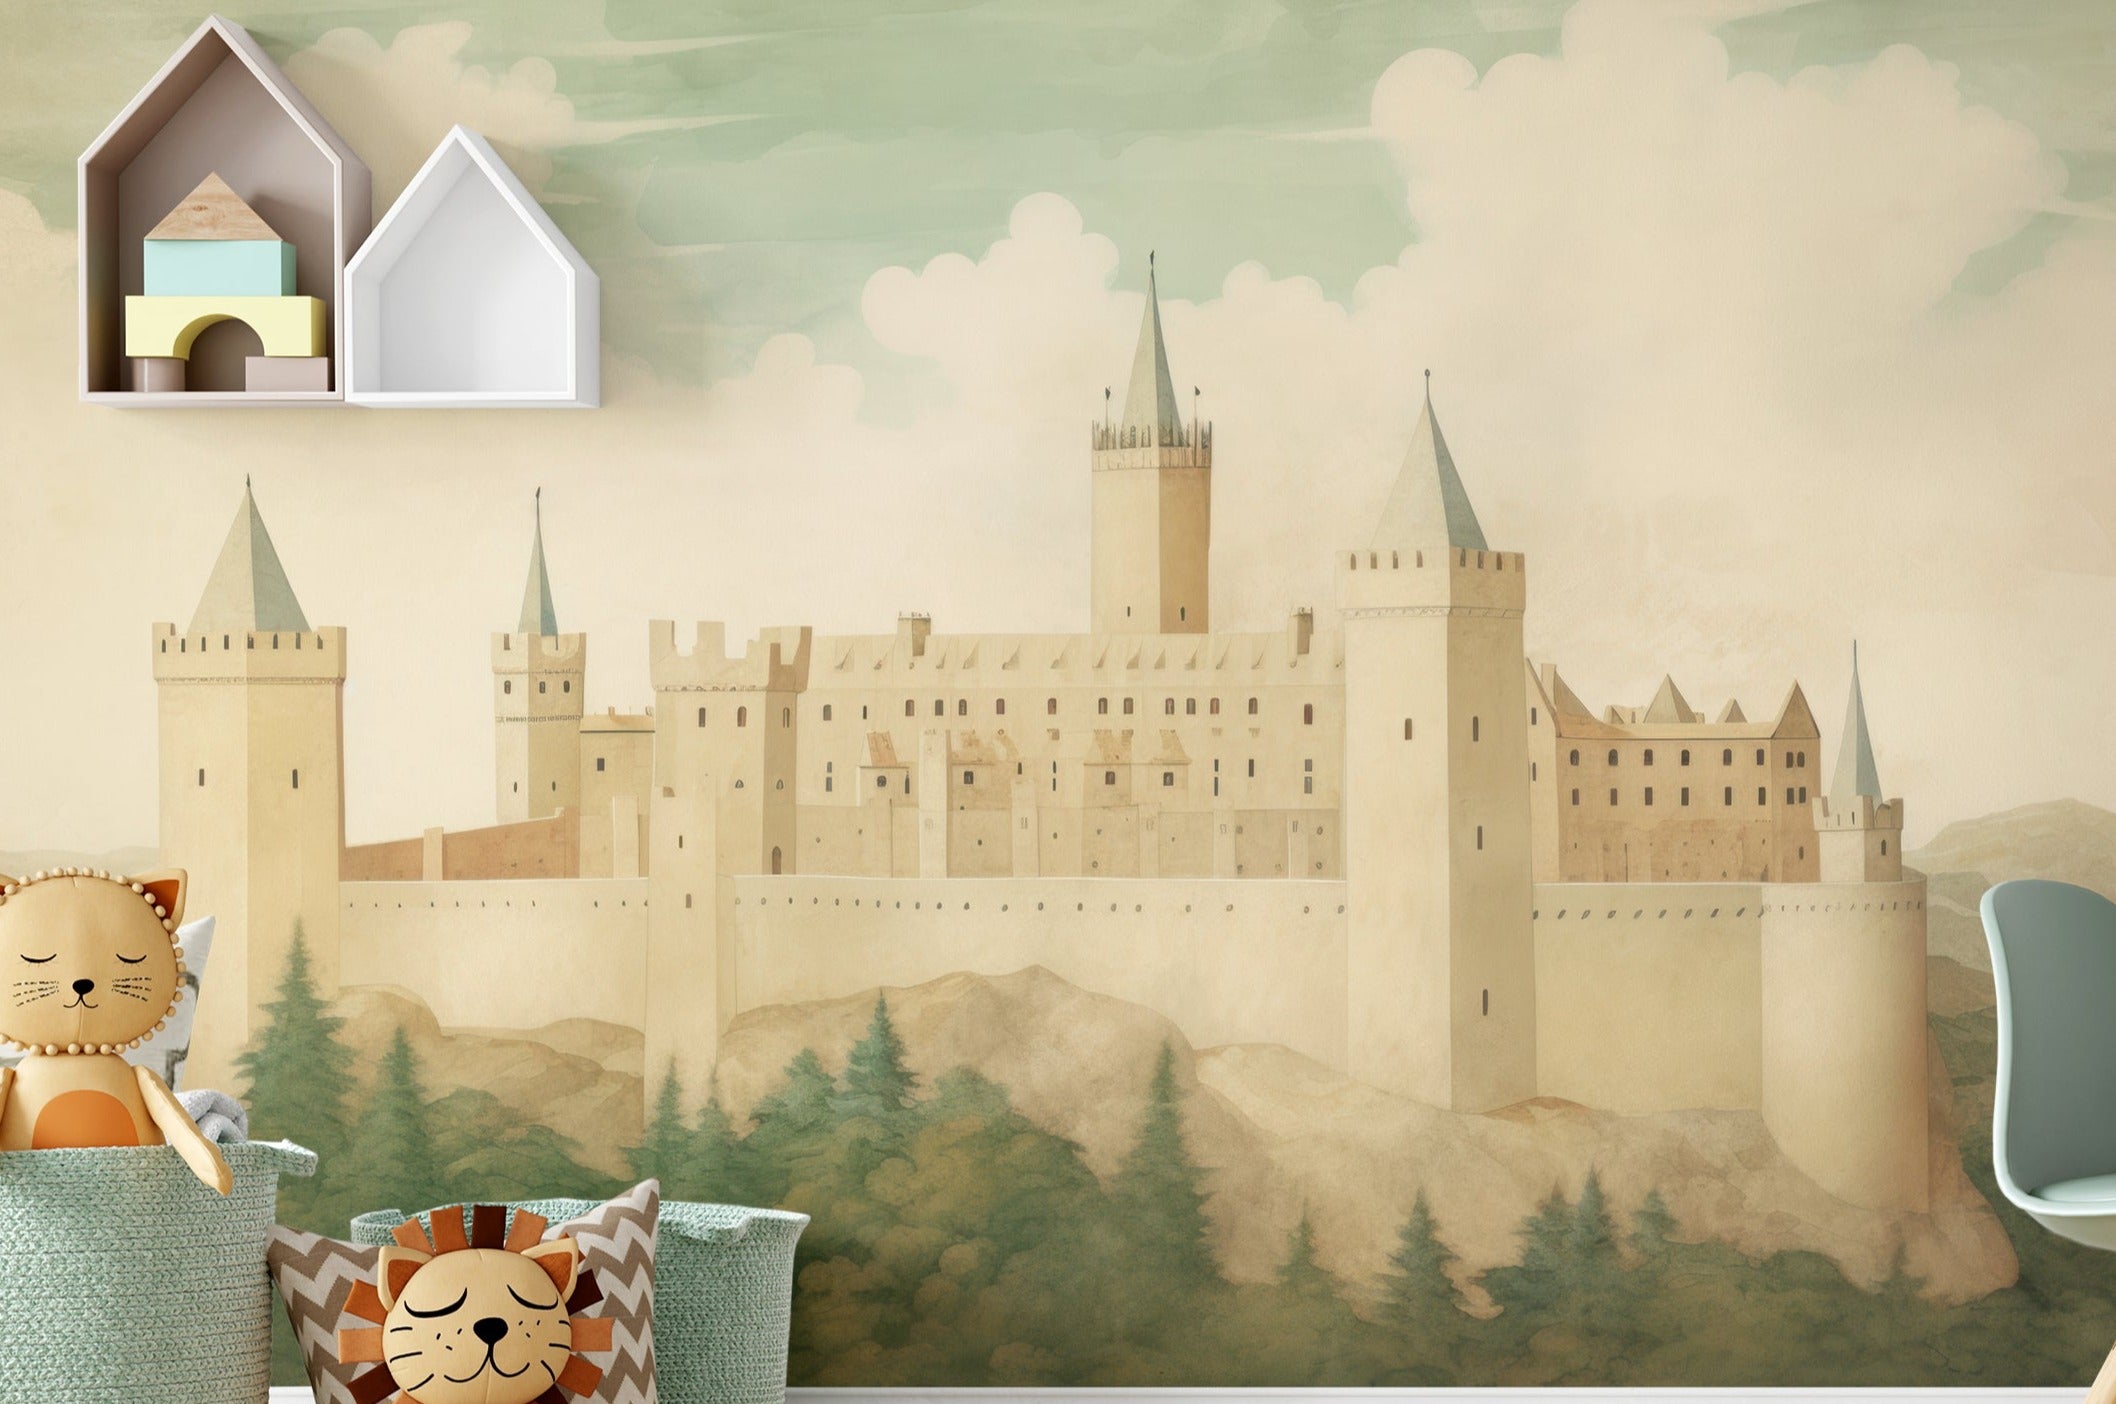 "Play area with 'DunBroch's Castle Mural' on the wall, showcasing a majestic castle and scenic hills, enhancing the medieval-themed decor."